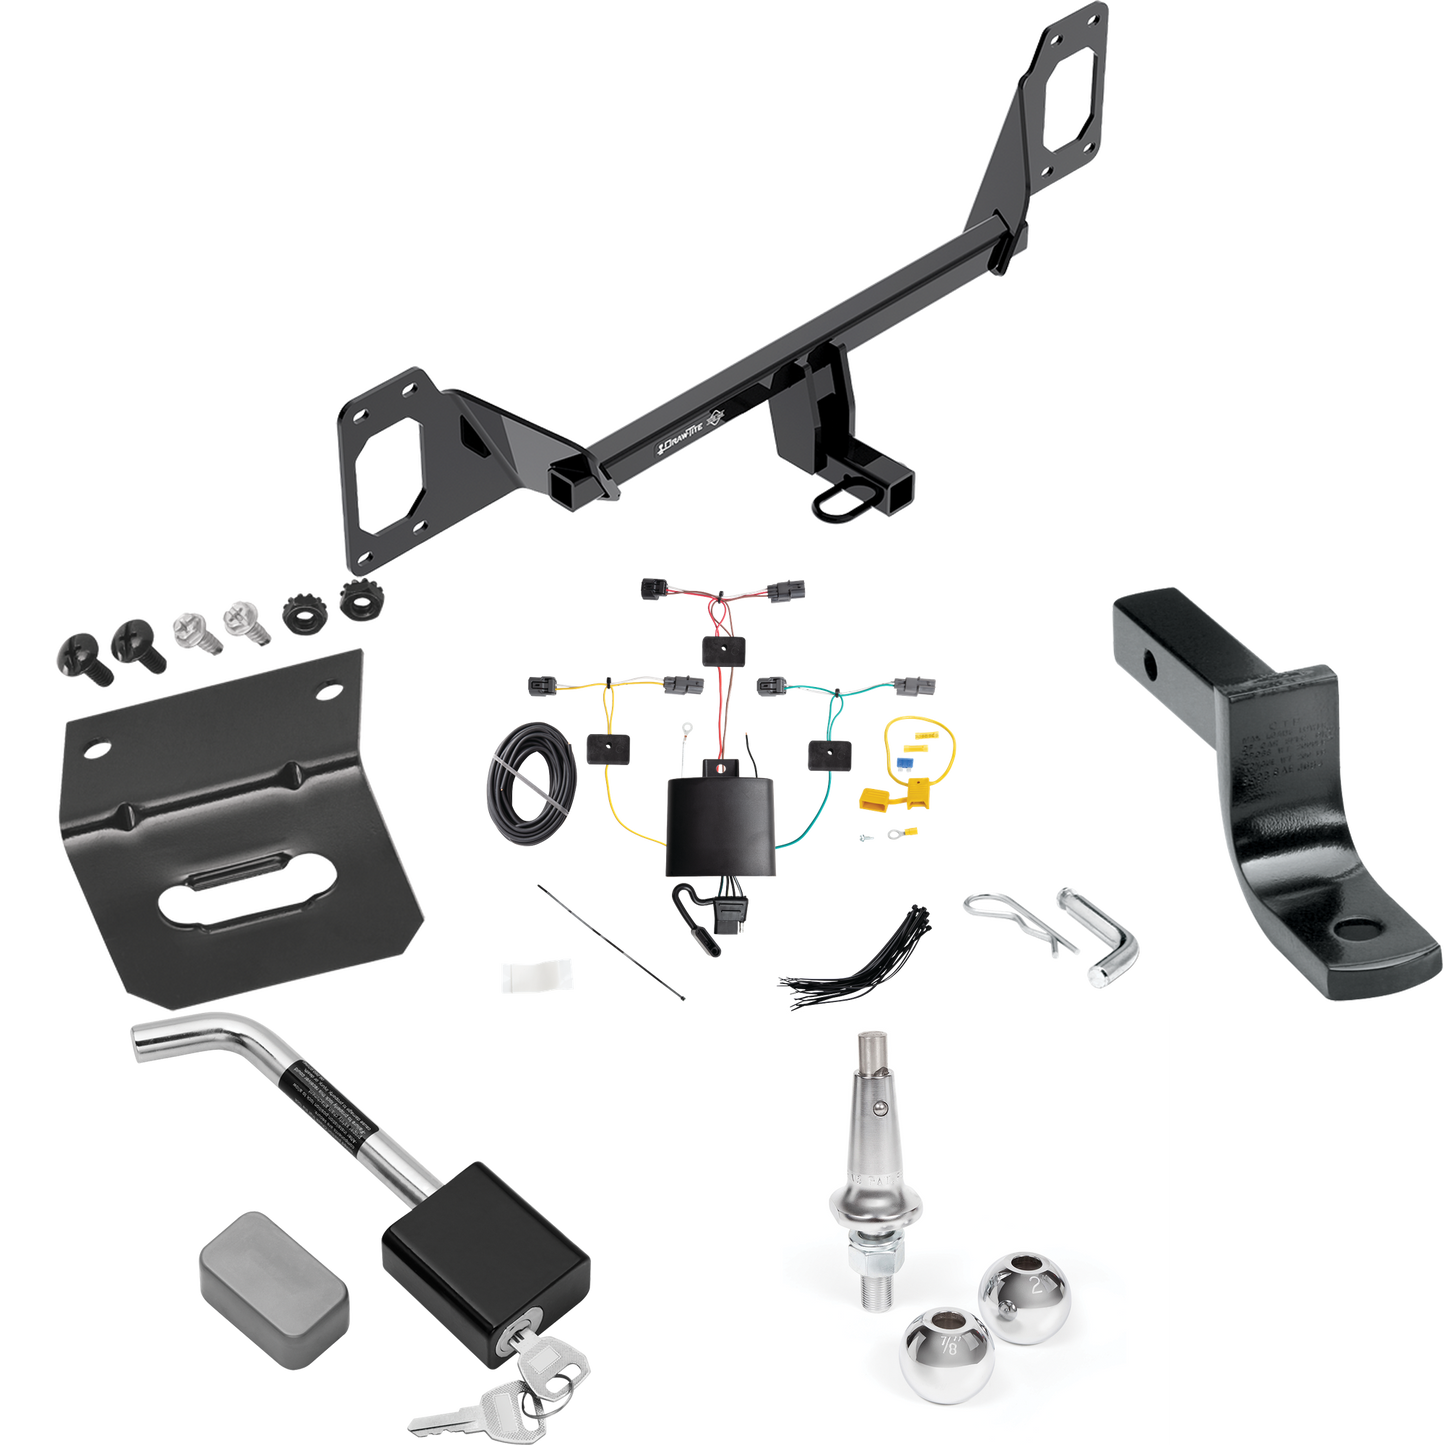 Fits 2022-2023 Honda Civic Trailer Hitch Tow PKG w/ 4-Flat Wiring Harness + Draw-Bar + Interchangeable 1-7/8" & 2" Balls + Wiring Bracket + Hitch Lock (For Coupe, Except Models w/Center Exhaust Models) By Draw-Tite